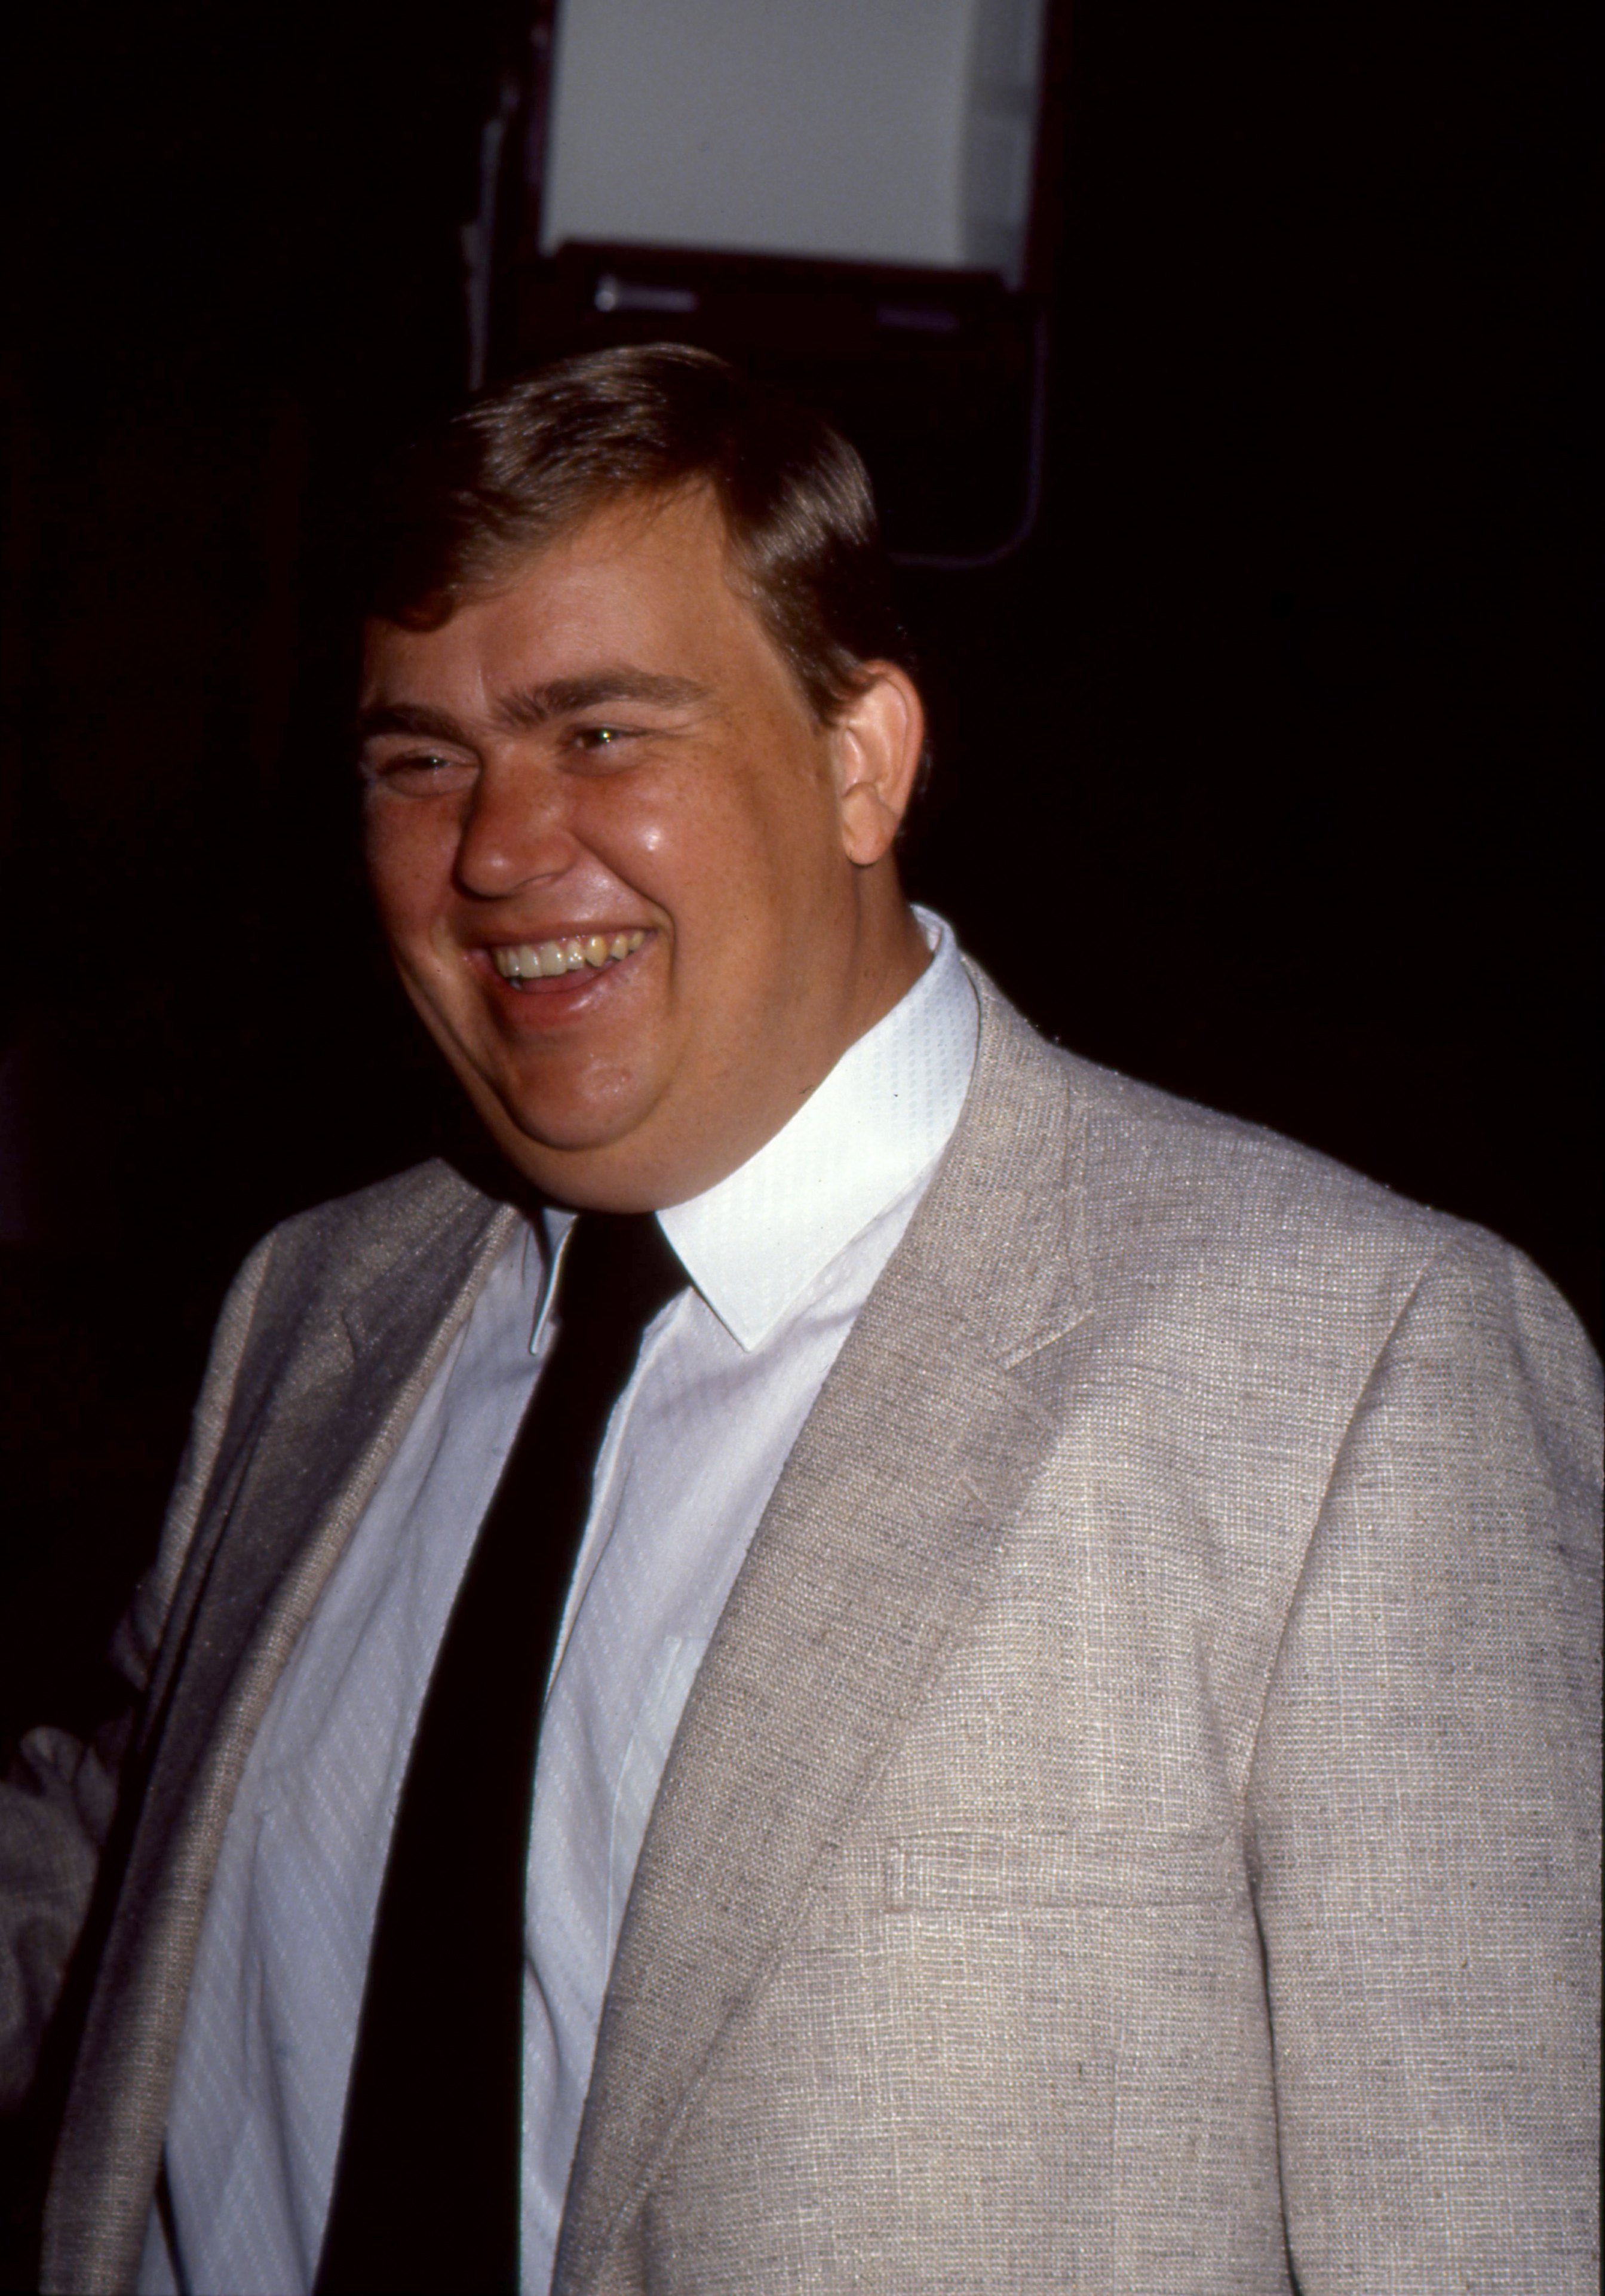 John Candy, circa 1985 | Source : Getty Images